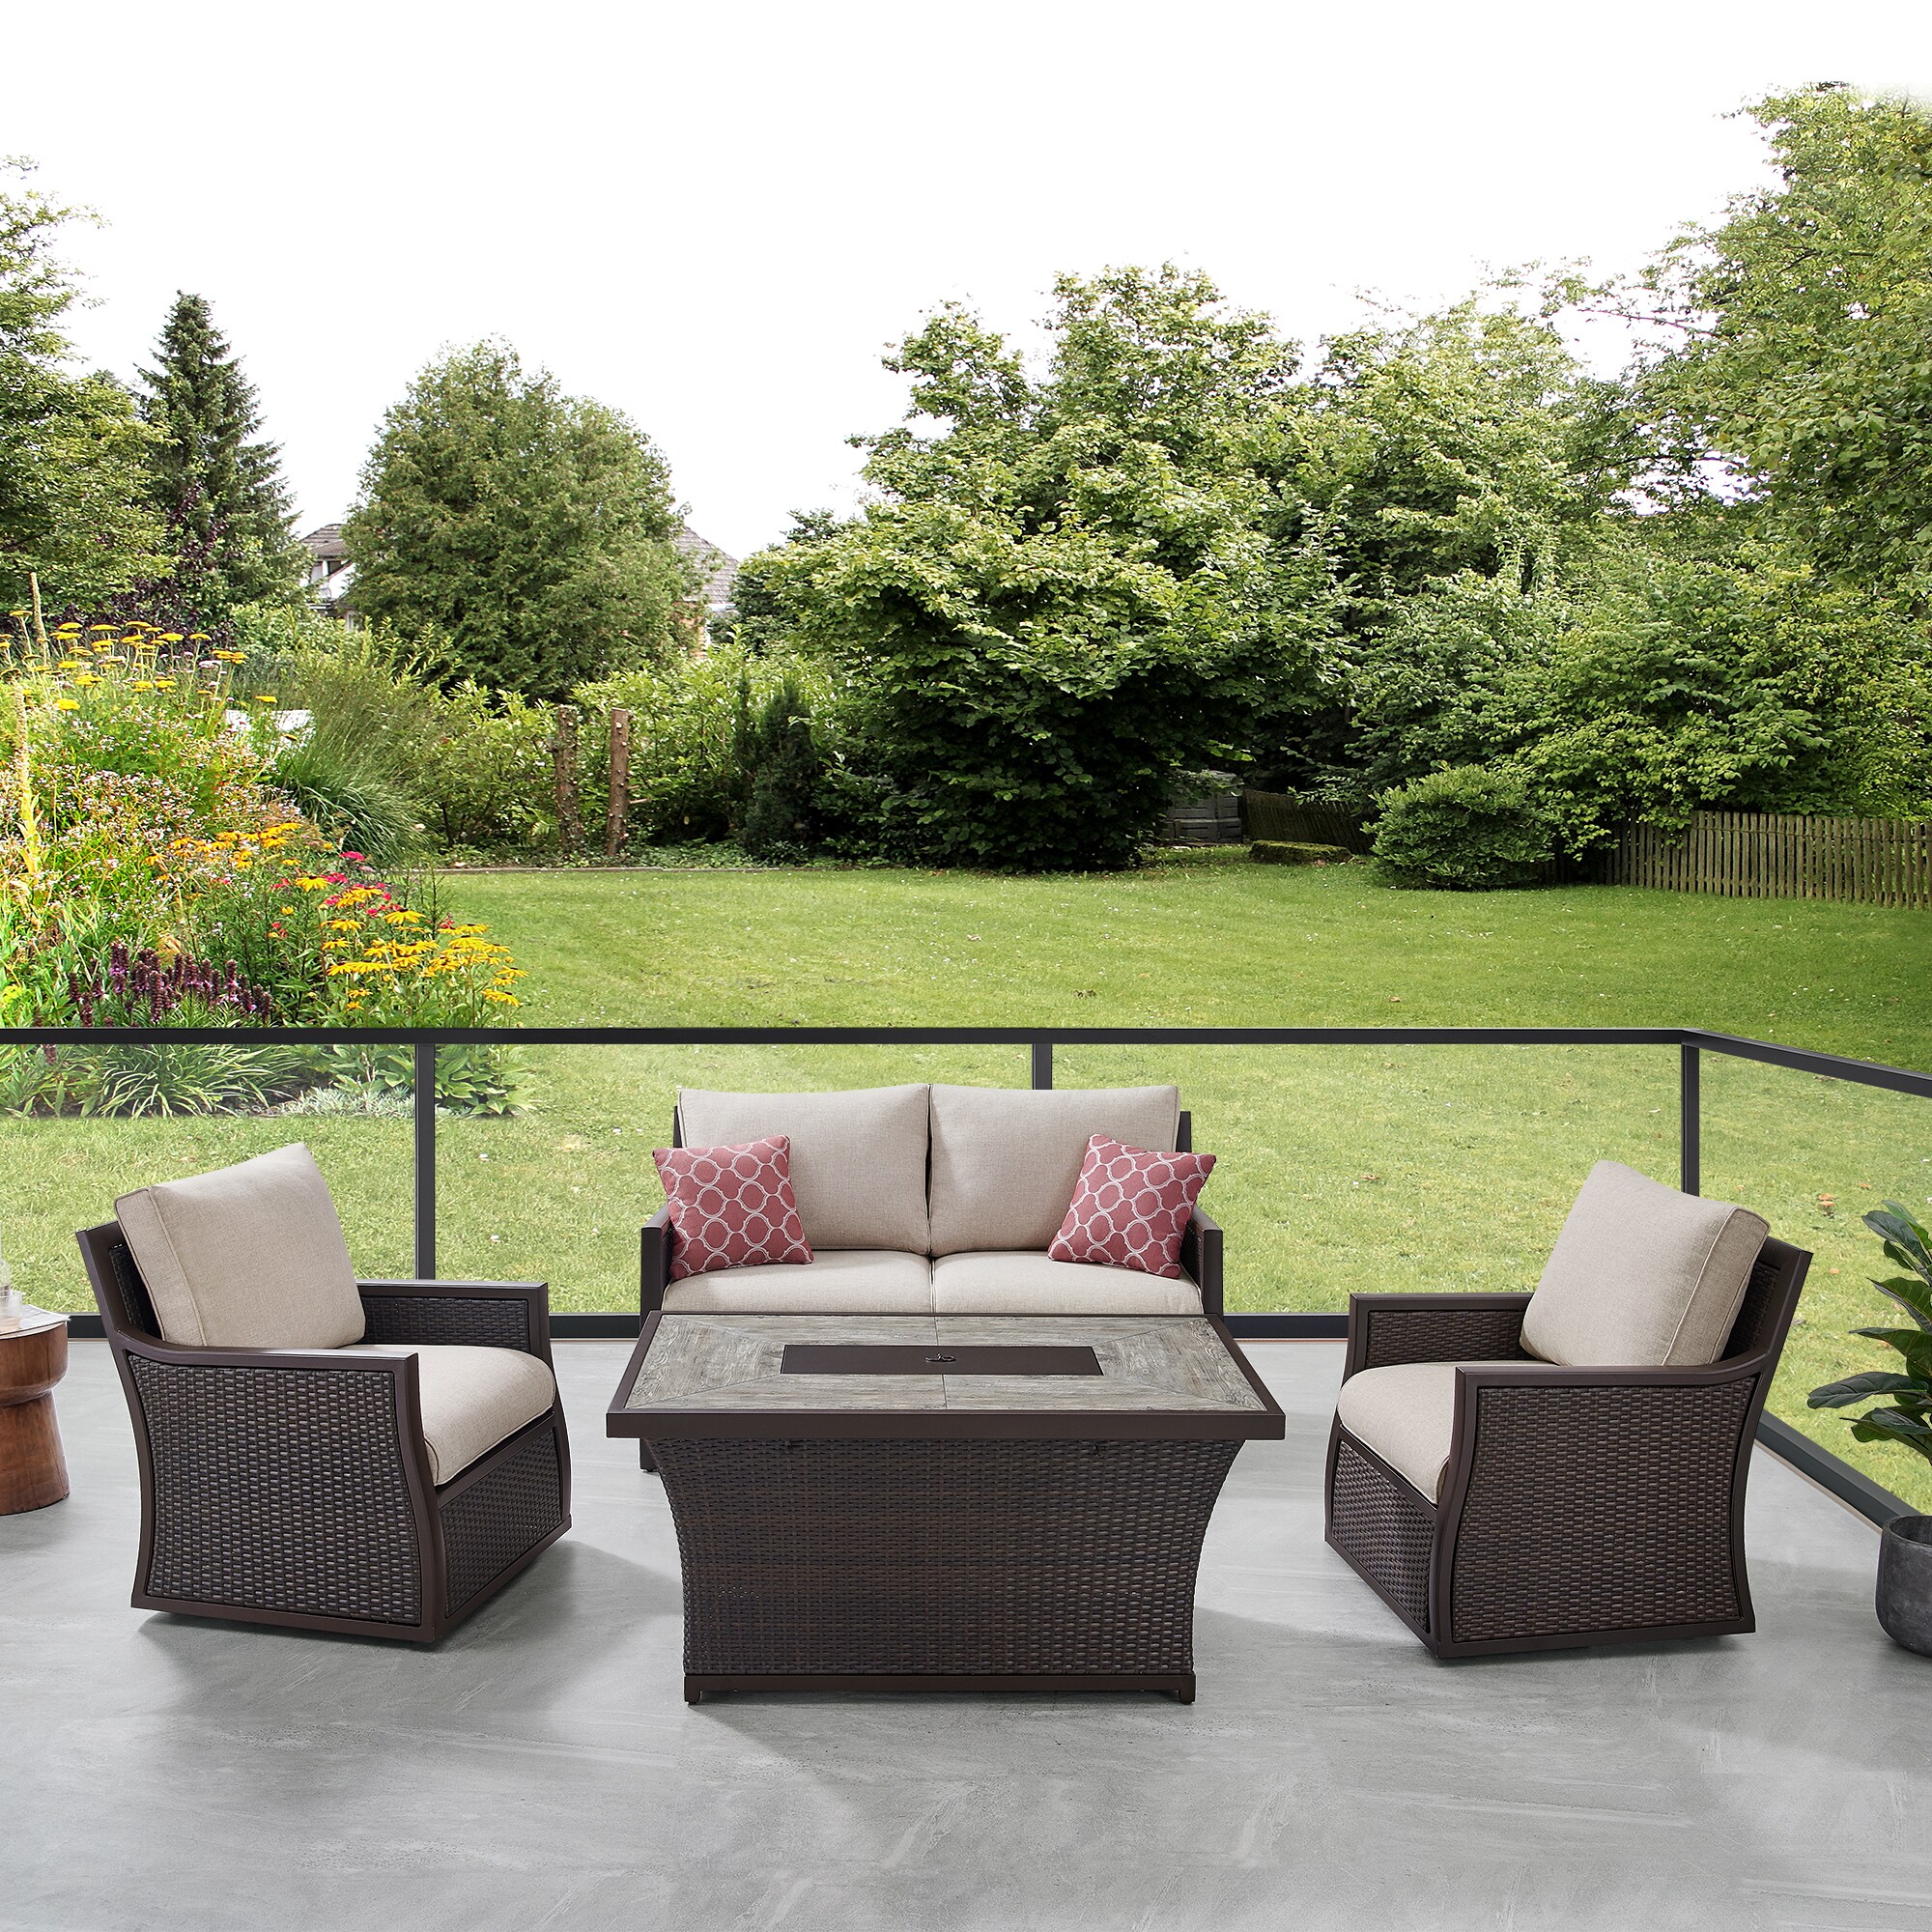 OVE Decors Barcelona 4-Piece Wicker Patio Conversation Set with Olefin  Cushions in the Patio Conversation Sets department at Lowes.com